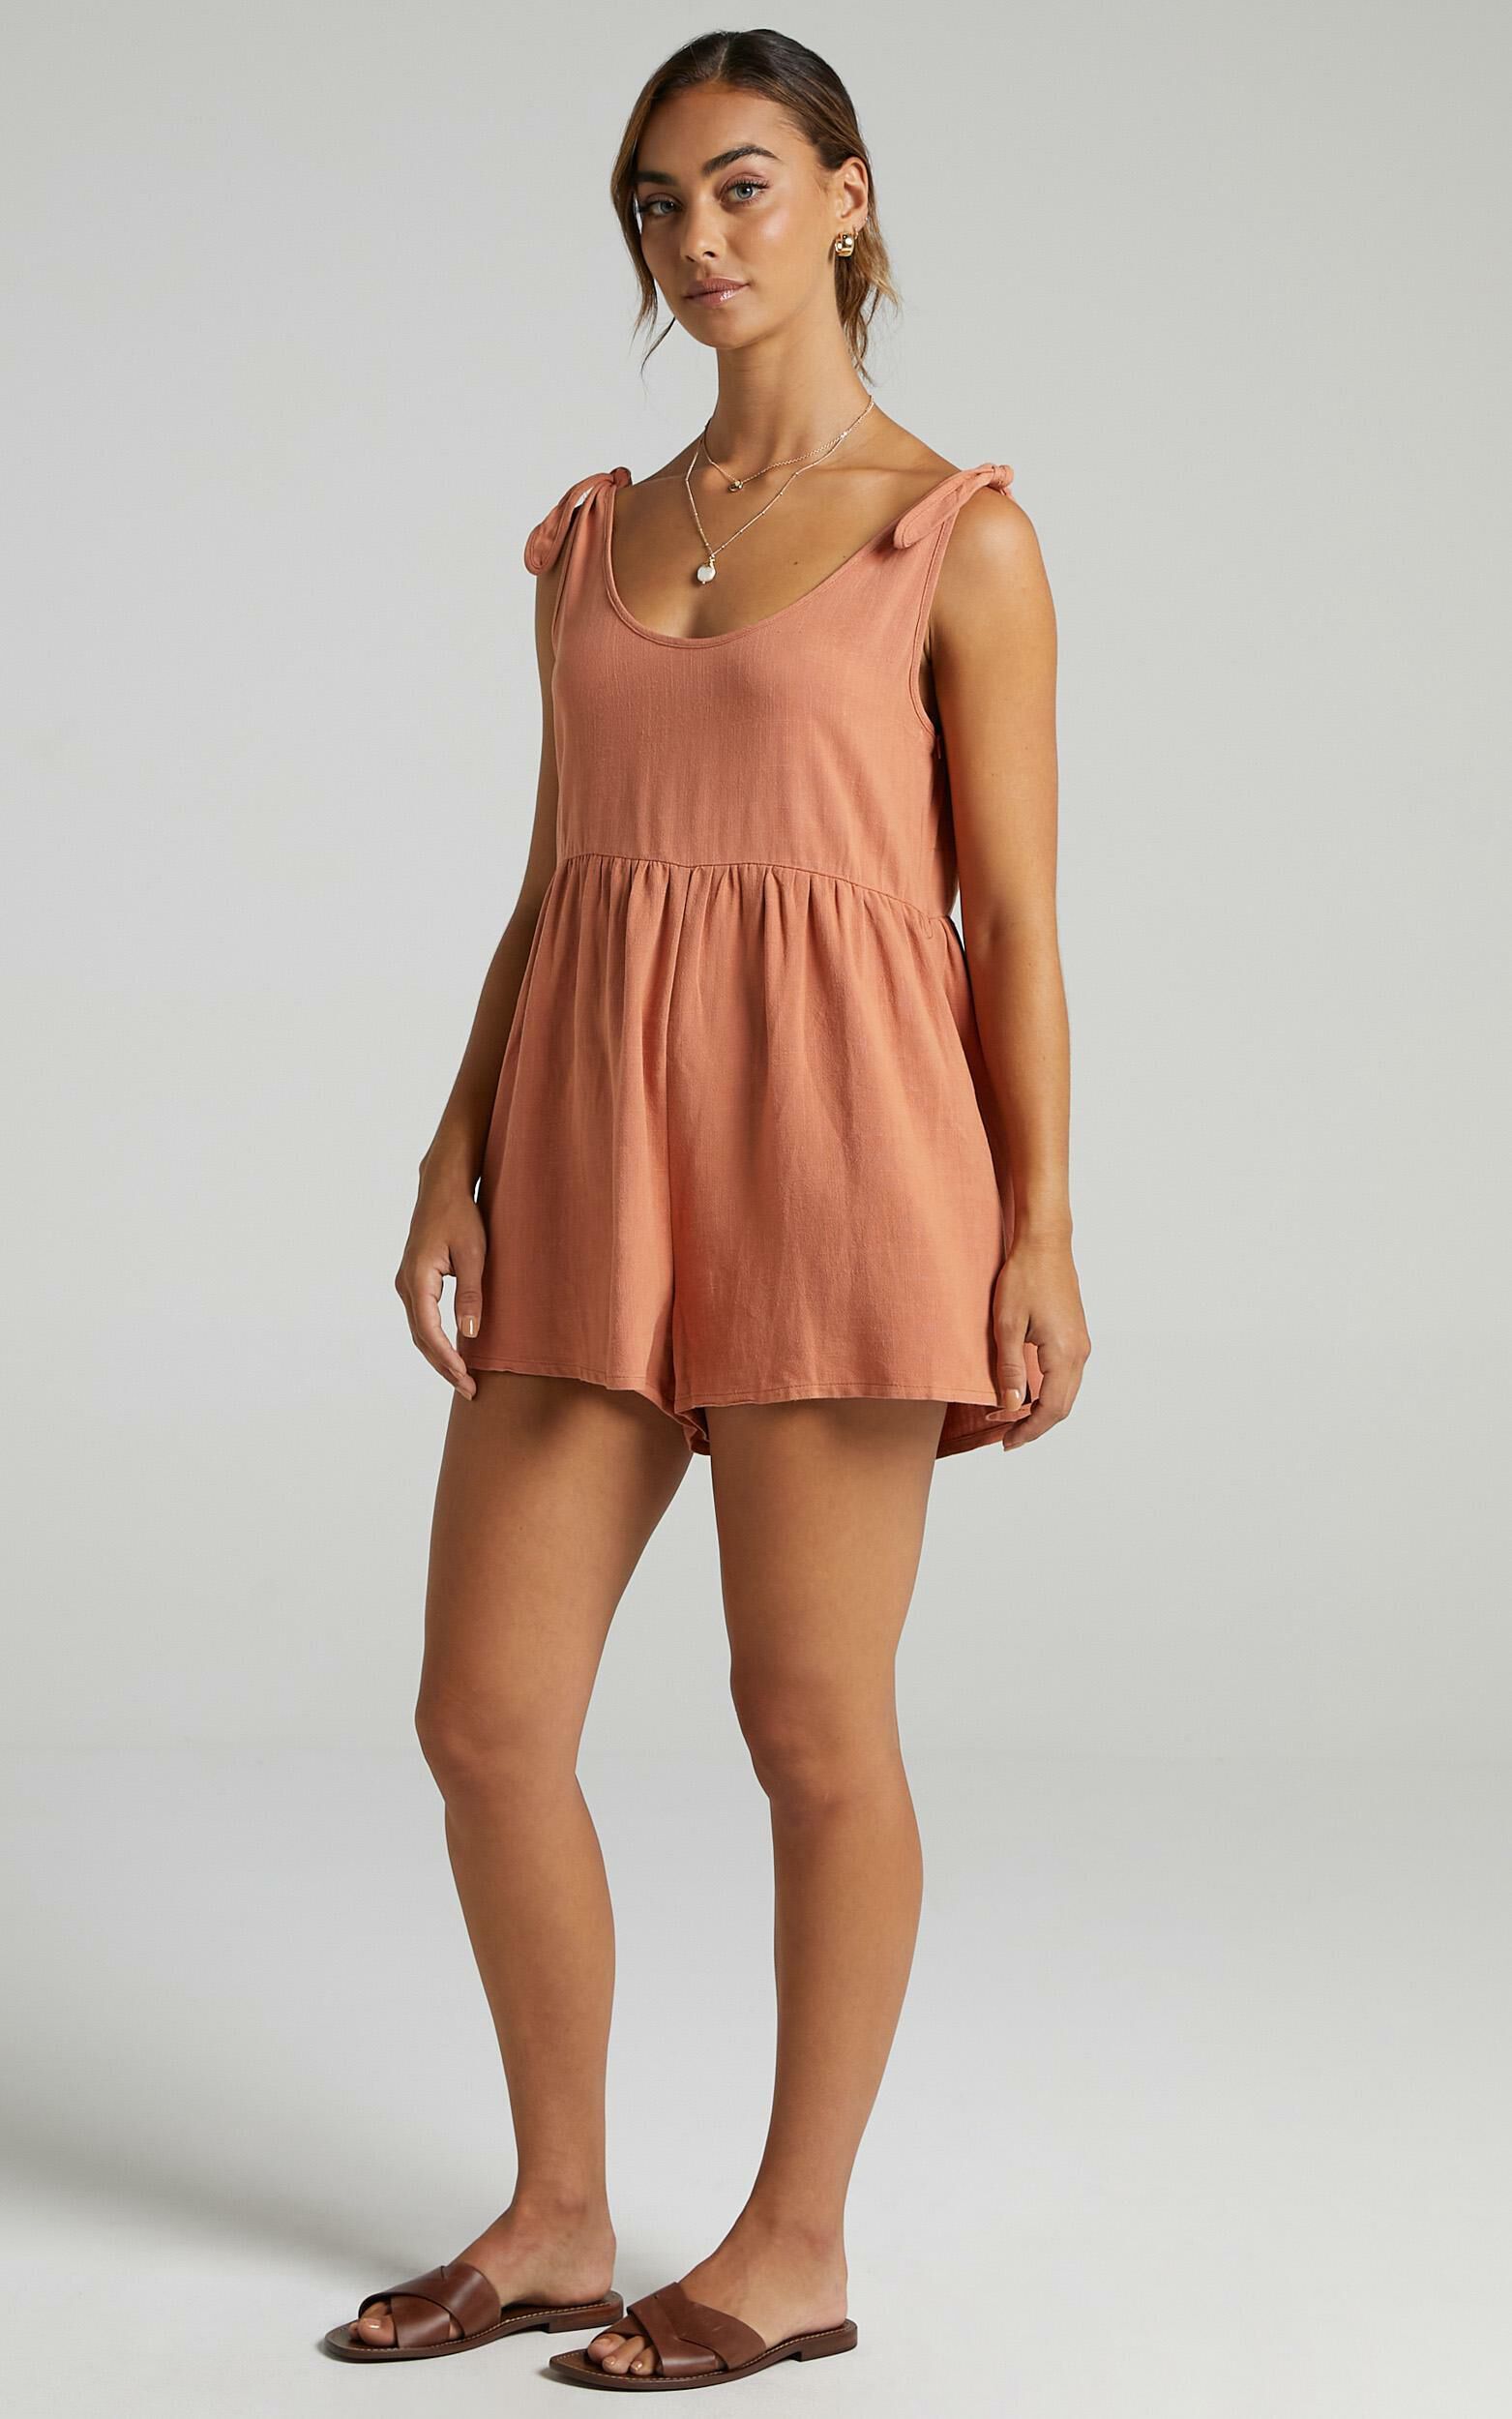 Bring This Down Playsuit In Dusty Rose Showpo Usa 7904